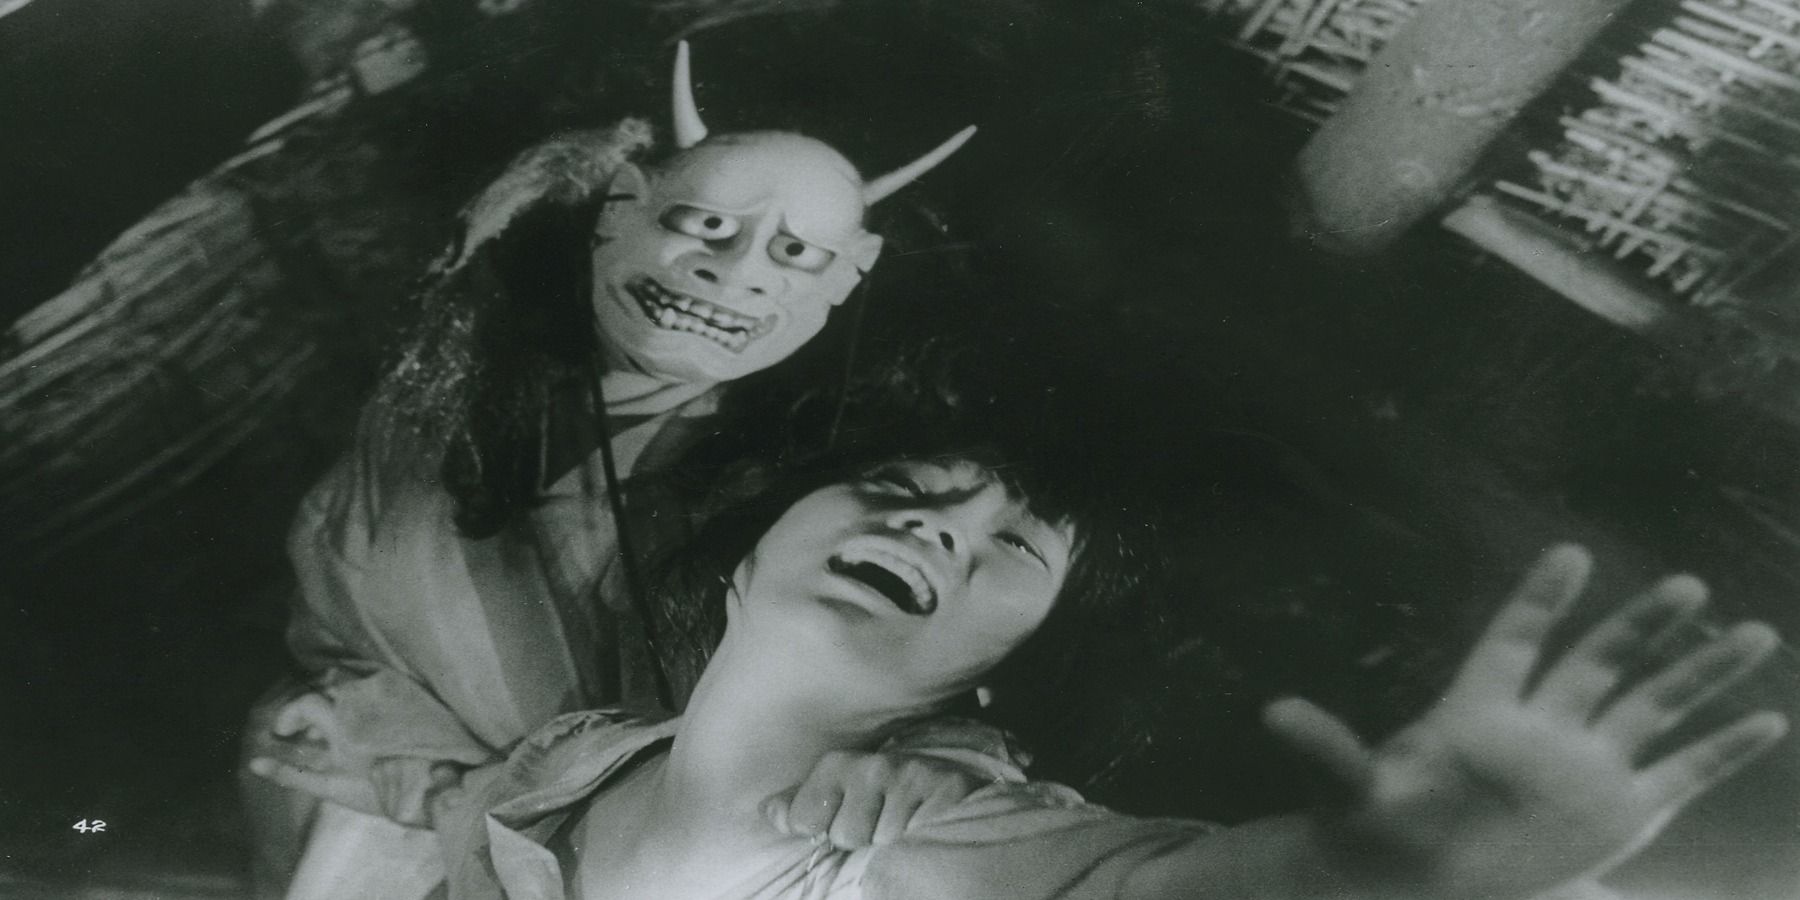 A woman is captured in Onibaba